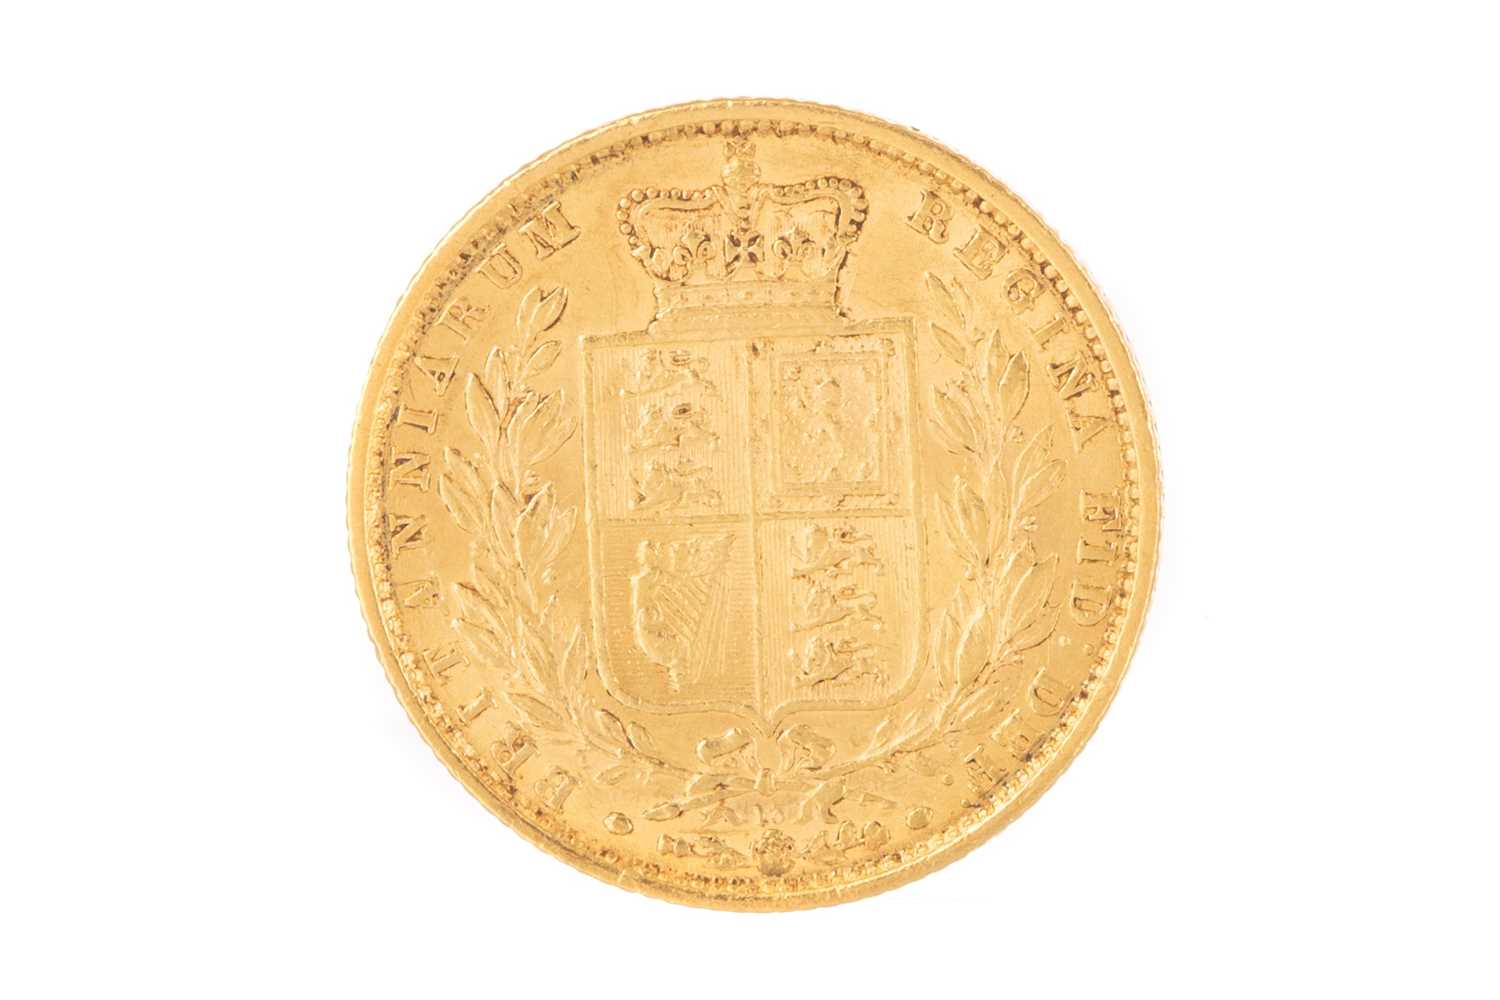 Lot 52 - VICTORIA GOLD SOVEREIGN